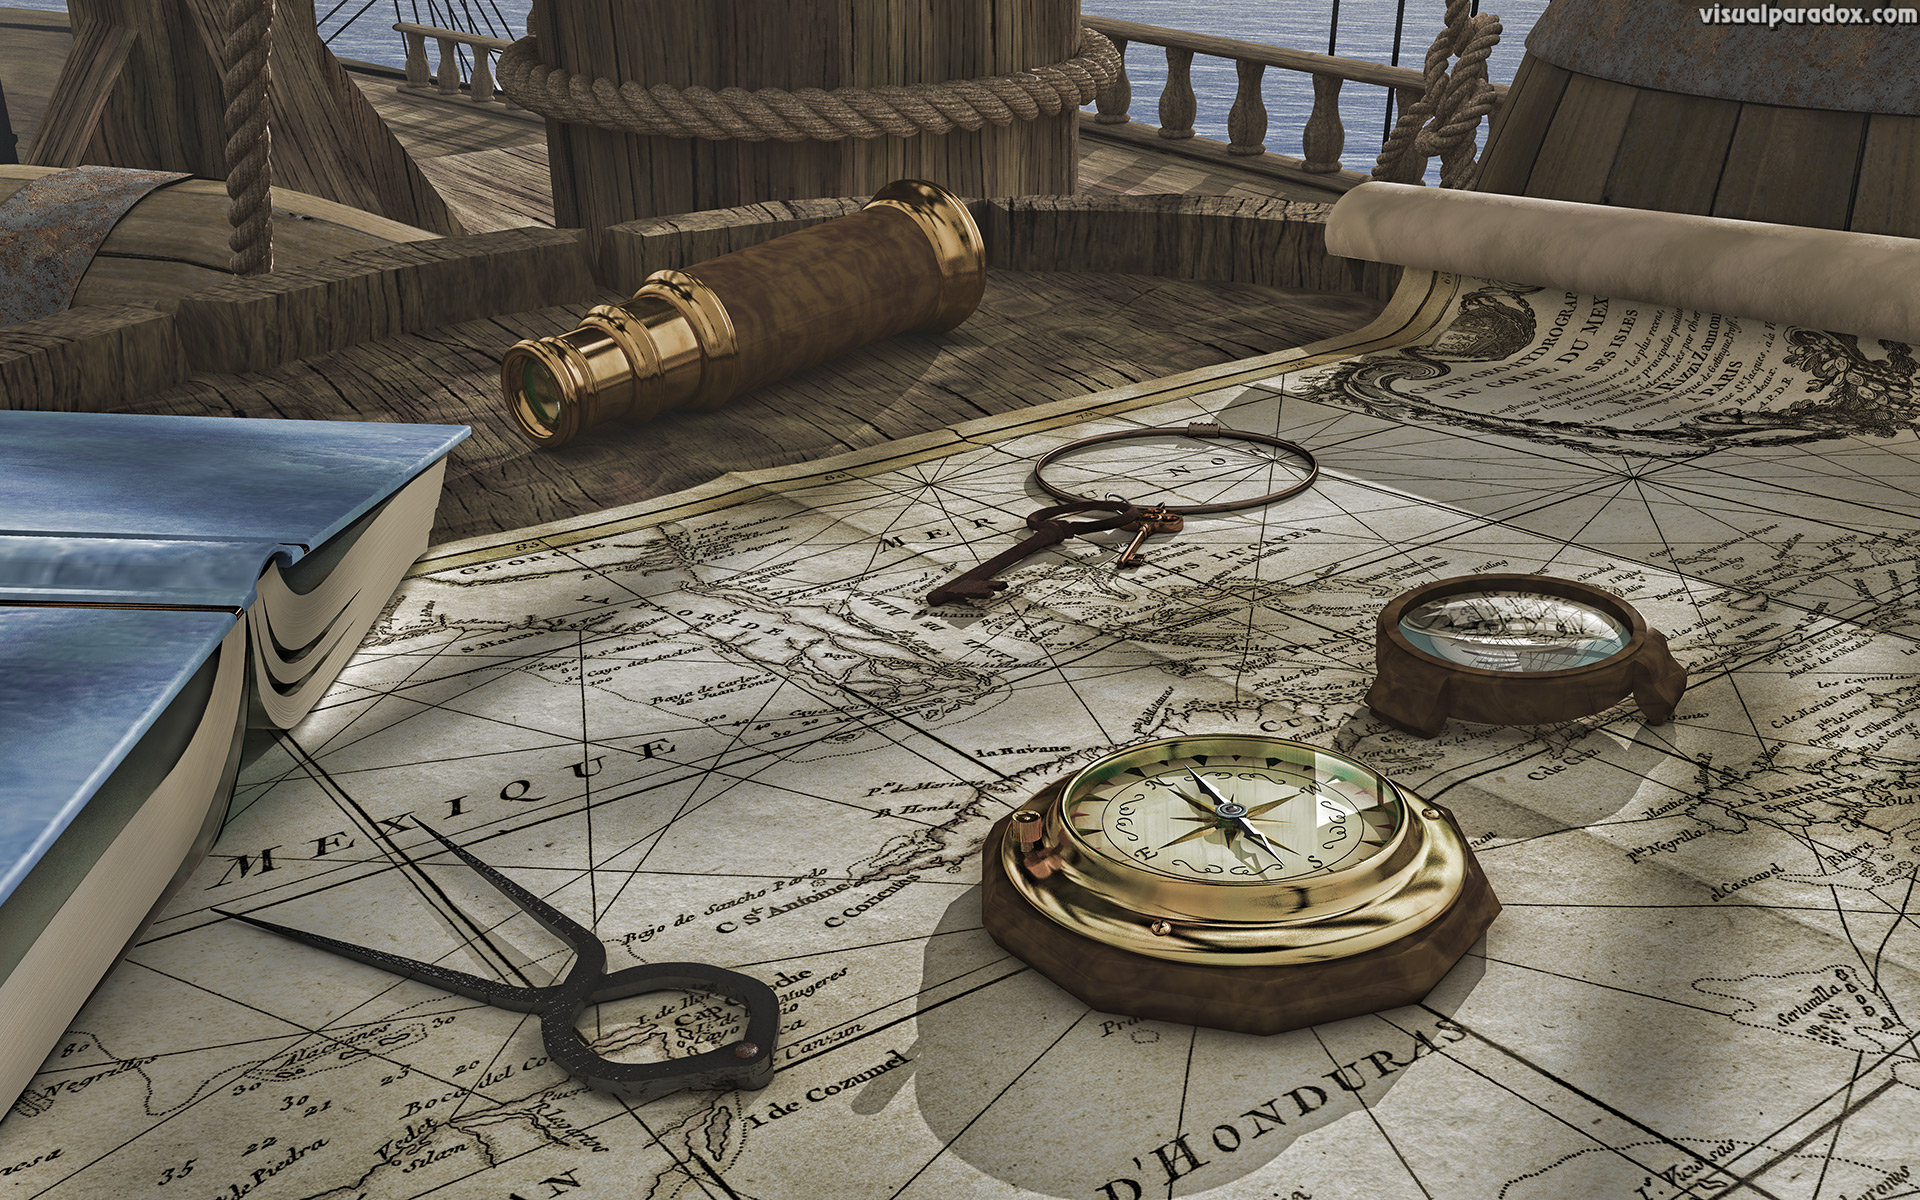 antique, atlas, background, boat, brown, caribbean, caribe, central america, classic, closeup, compass, direction, dirty, east, explore, find, geography, instrument, journey, latitude, locate, longitude, magnetic, magnify, map, measurement, mexico, nautical, navigate, navigation, north, old, orientation, paper, pirate, position, retro, rope, sail, scope, sea, search, ship, shipping, south, spyglass, steering, success, survey, telescope, tool, travel, treasure, vintage, way, west, 3d, wallpaper